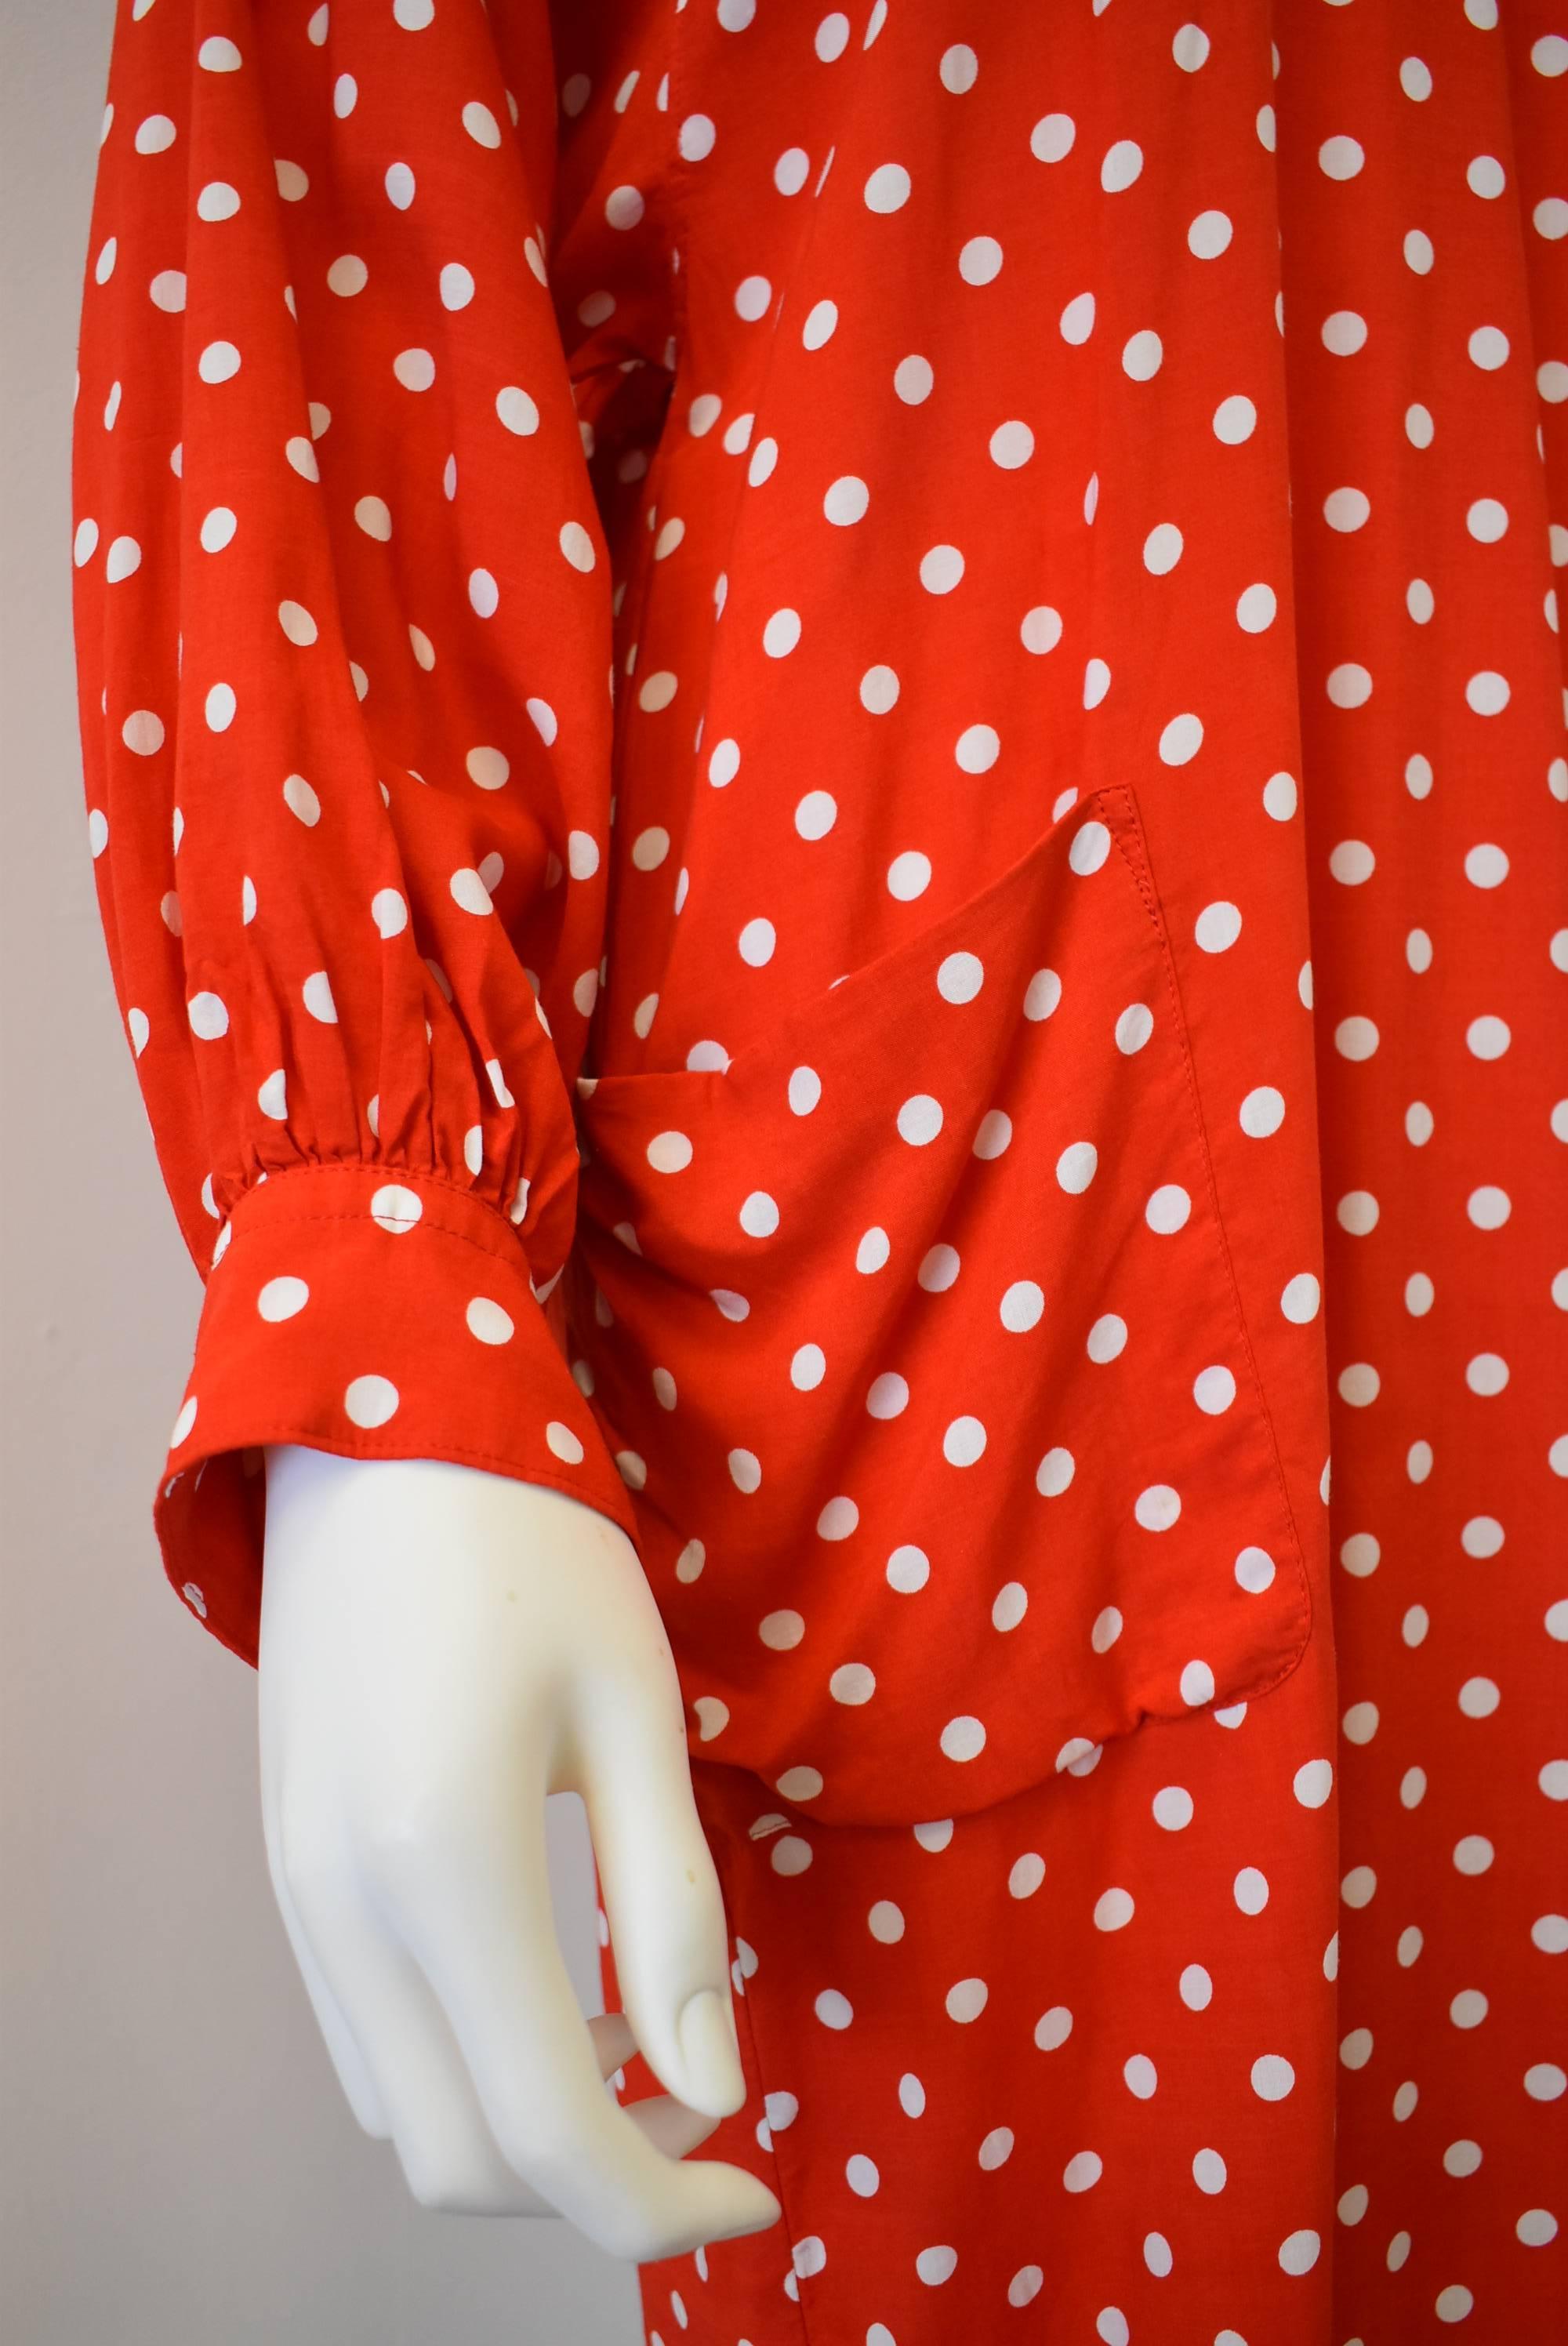 A red and white polka dot ‘Minnie Mouse’ pinafore dress from Comme des Garçons. The dress has a Peter Pan collar, pocket on the front and a concealed inside pocket. The pinafore dress is designed to be worn over clothing and has two ribbon ties at